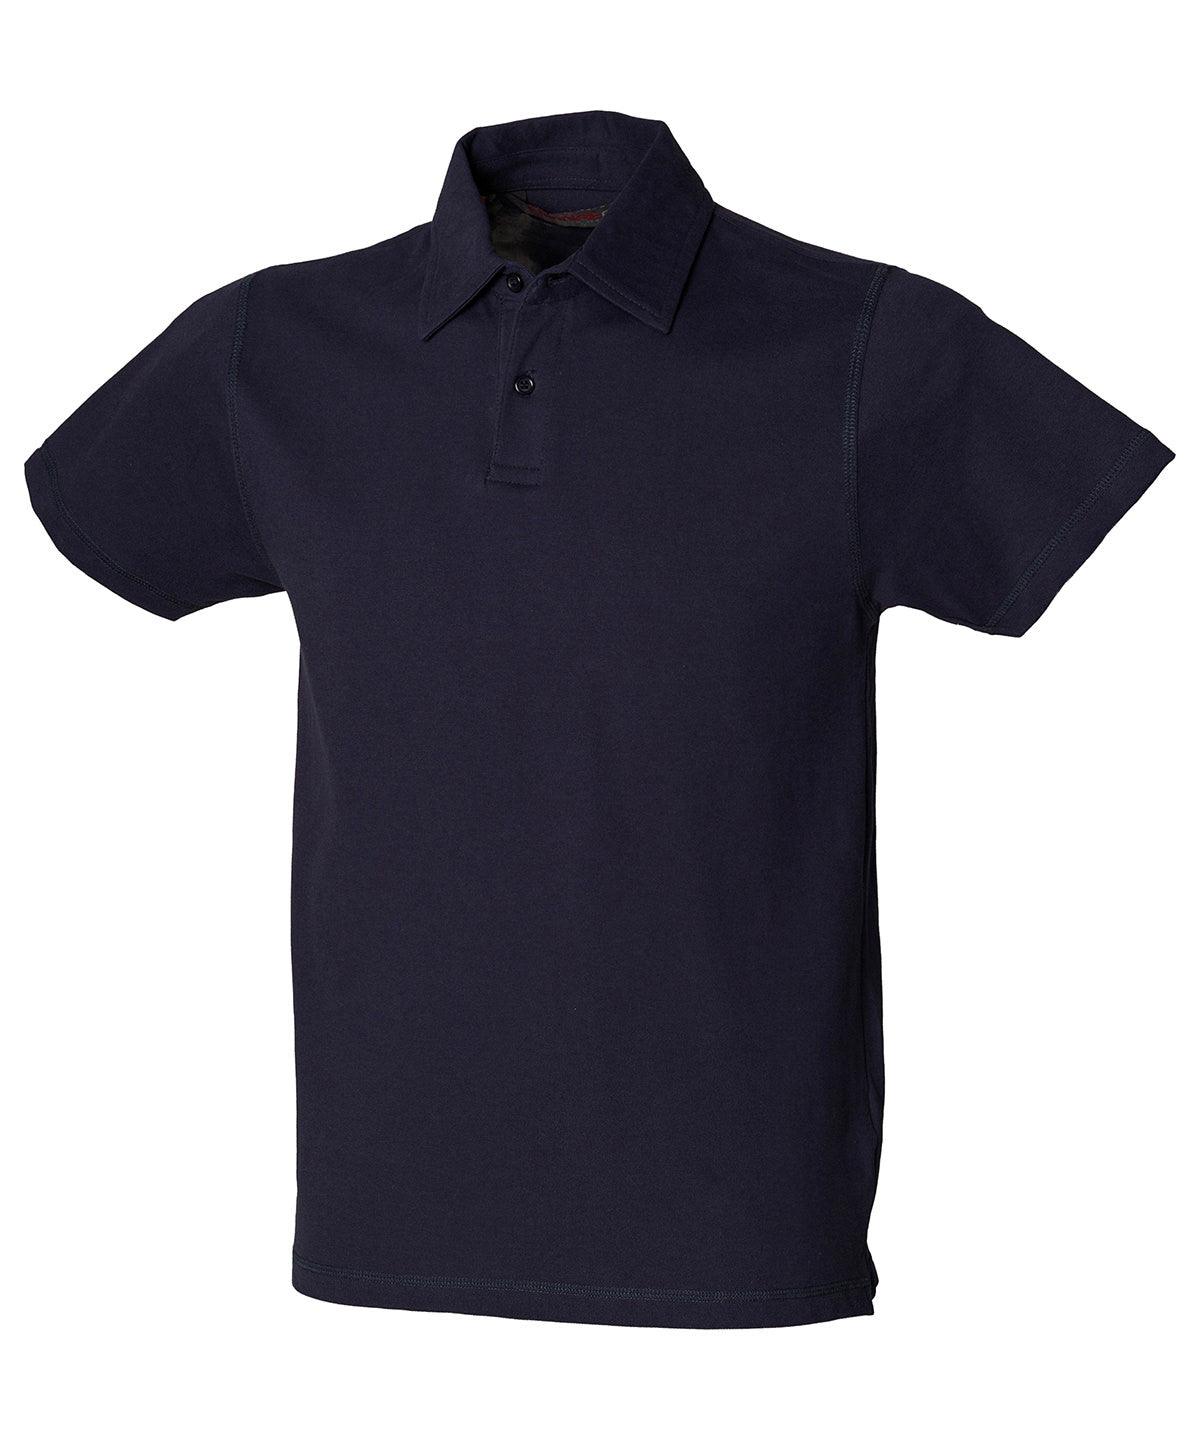 Navy - Short sleeve stretch polo Polos SF Polos & Casual, Raladeal - Recently Added, Rebrandable, Sale Schoolwear Centres